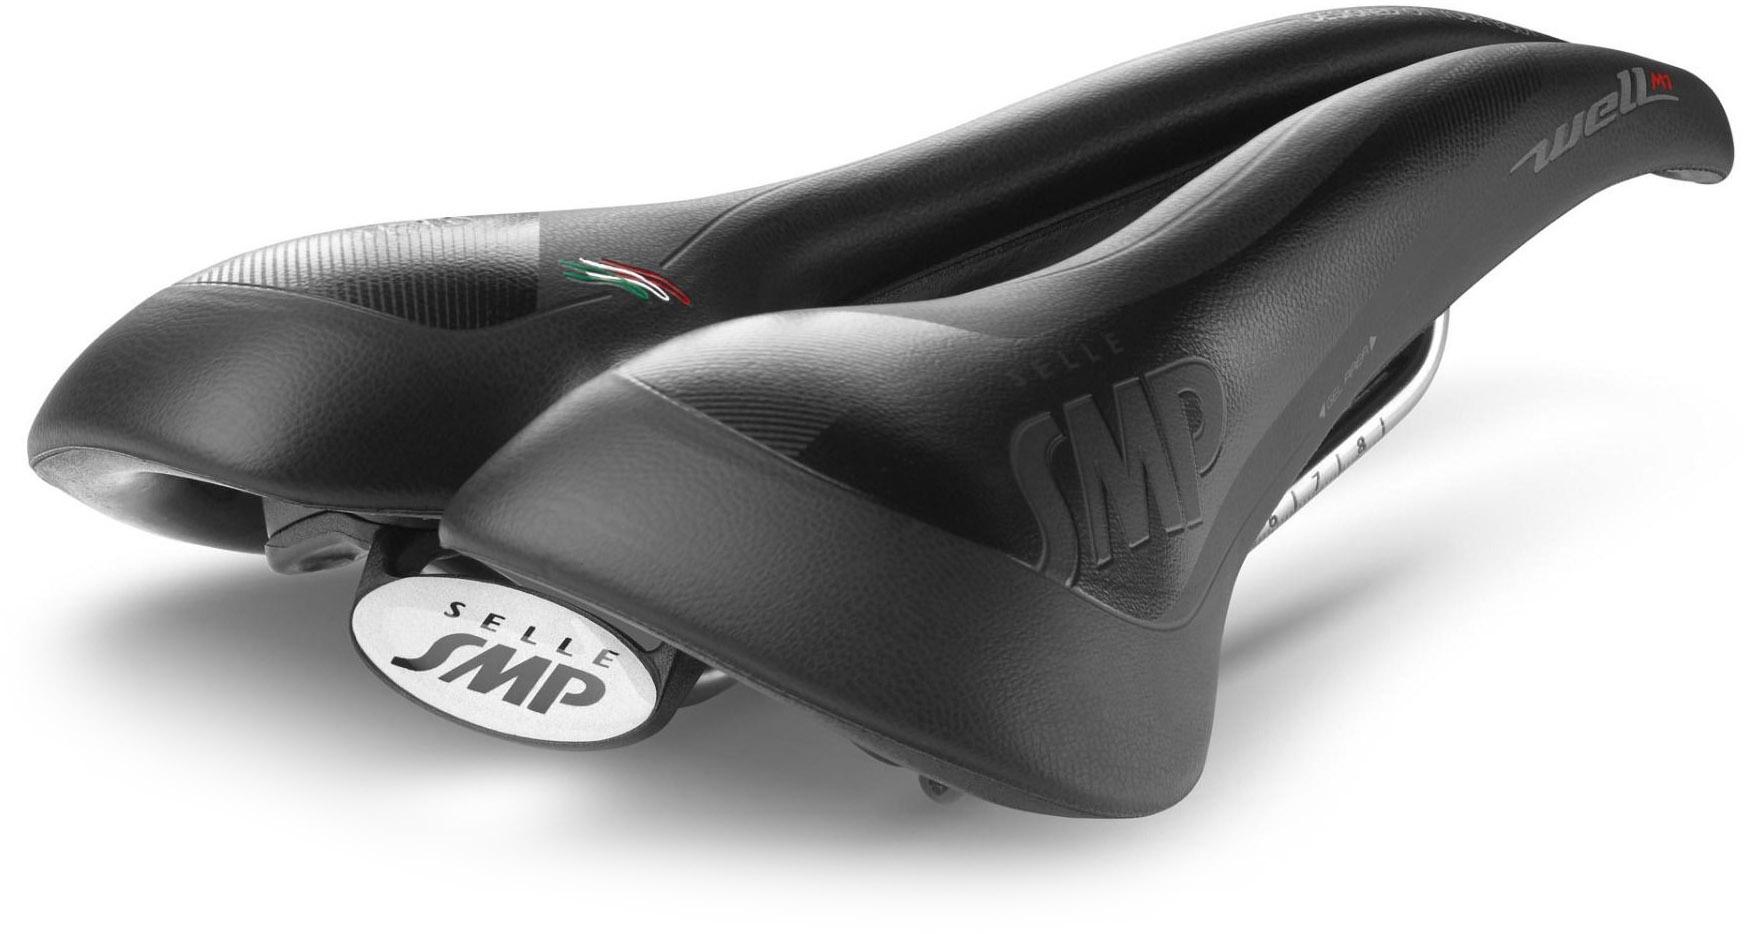 Selle SMP Well M1 Gel Saddle |